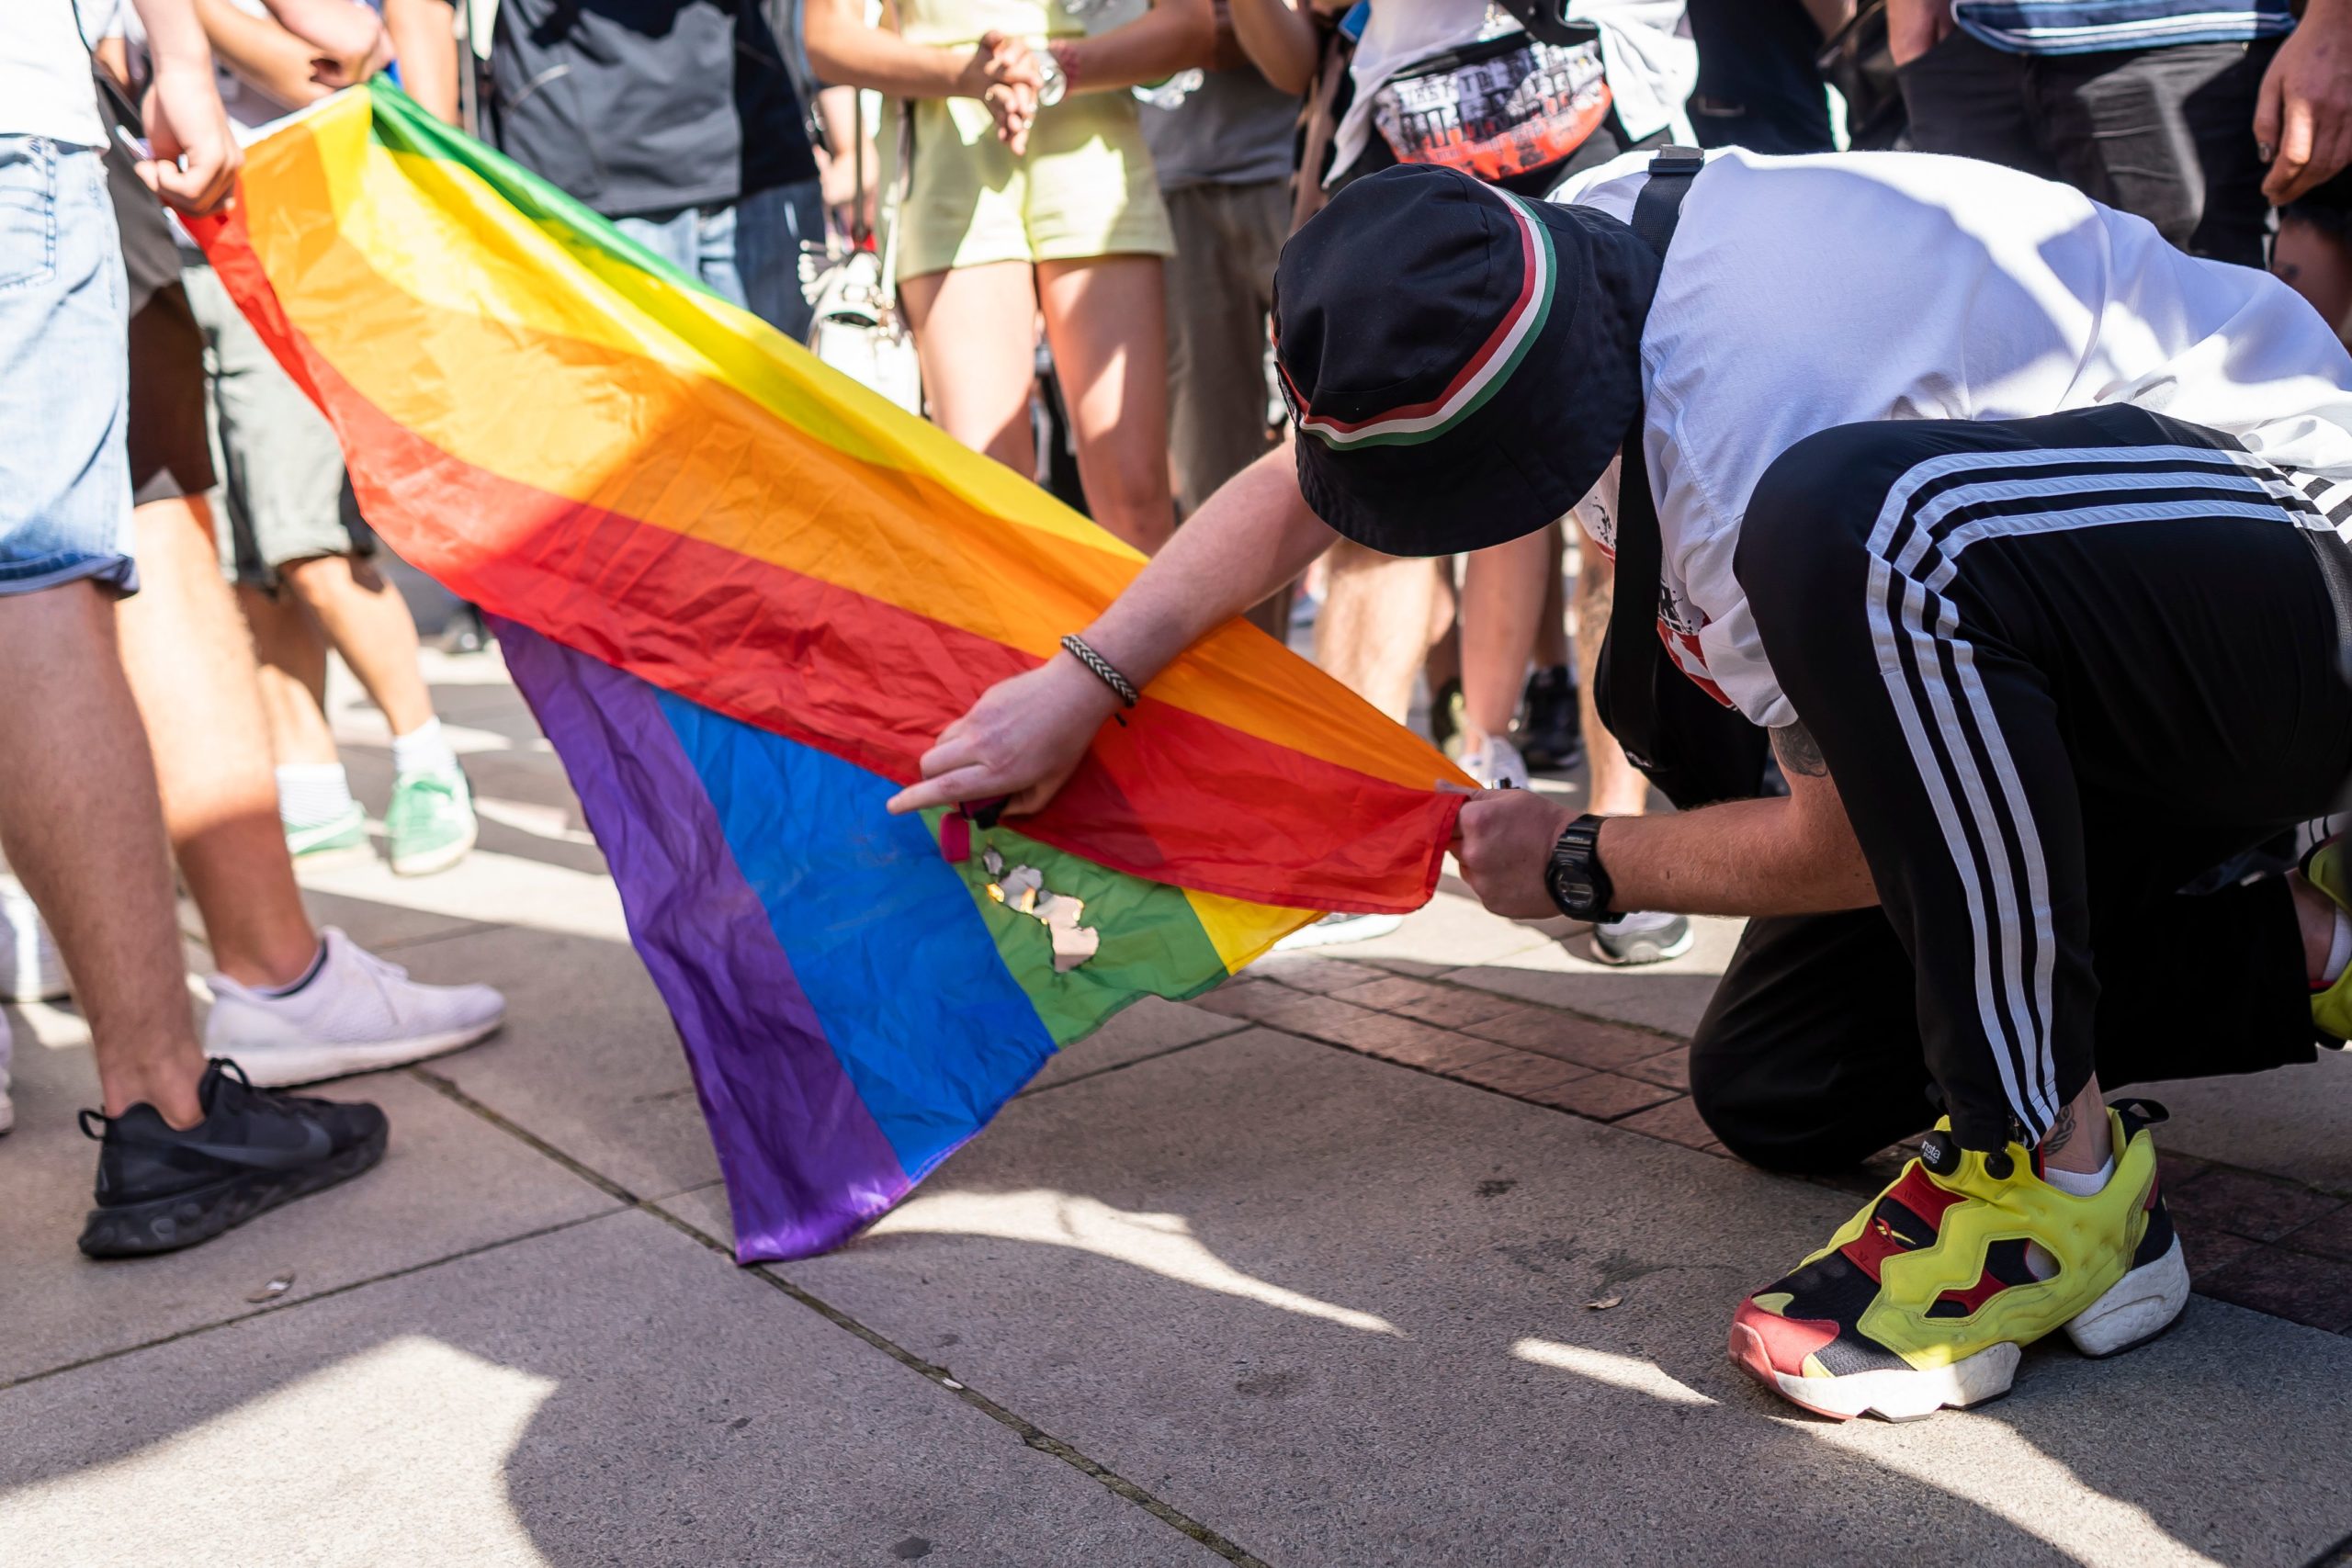 An activist attempts to burn a rainbow flag in front of the Warsaw University 